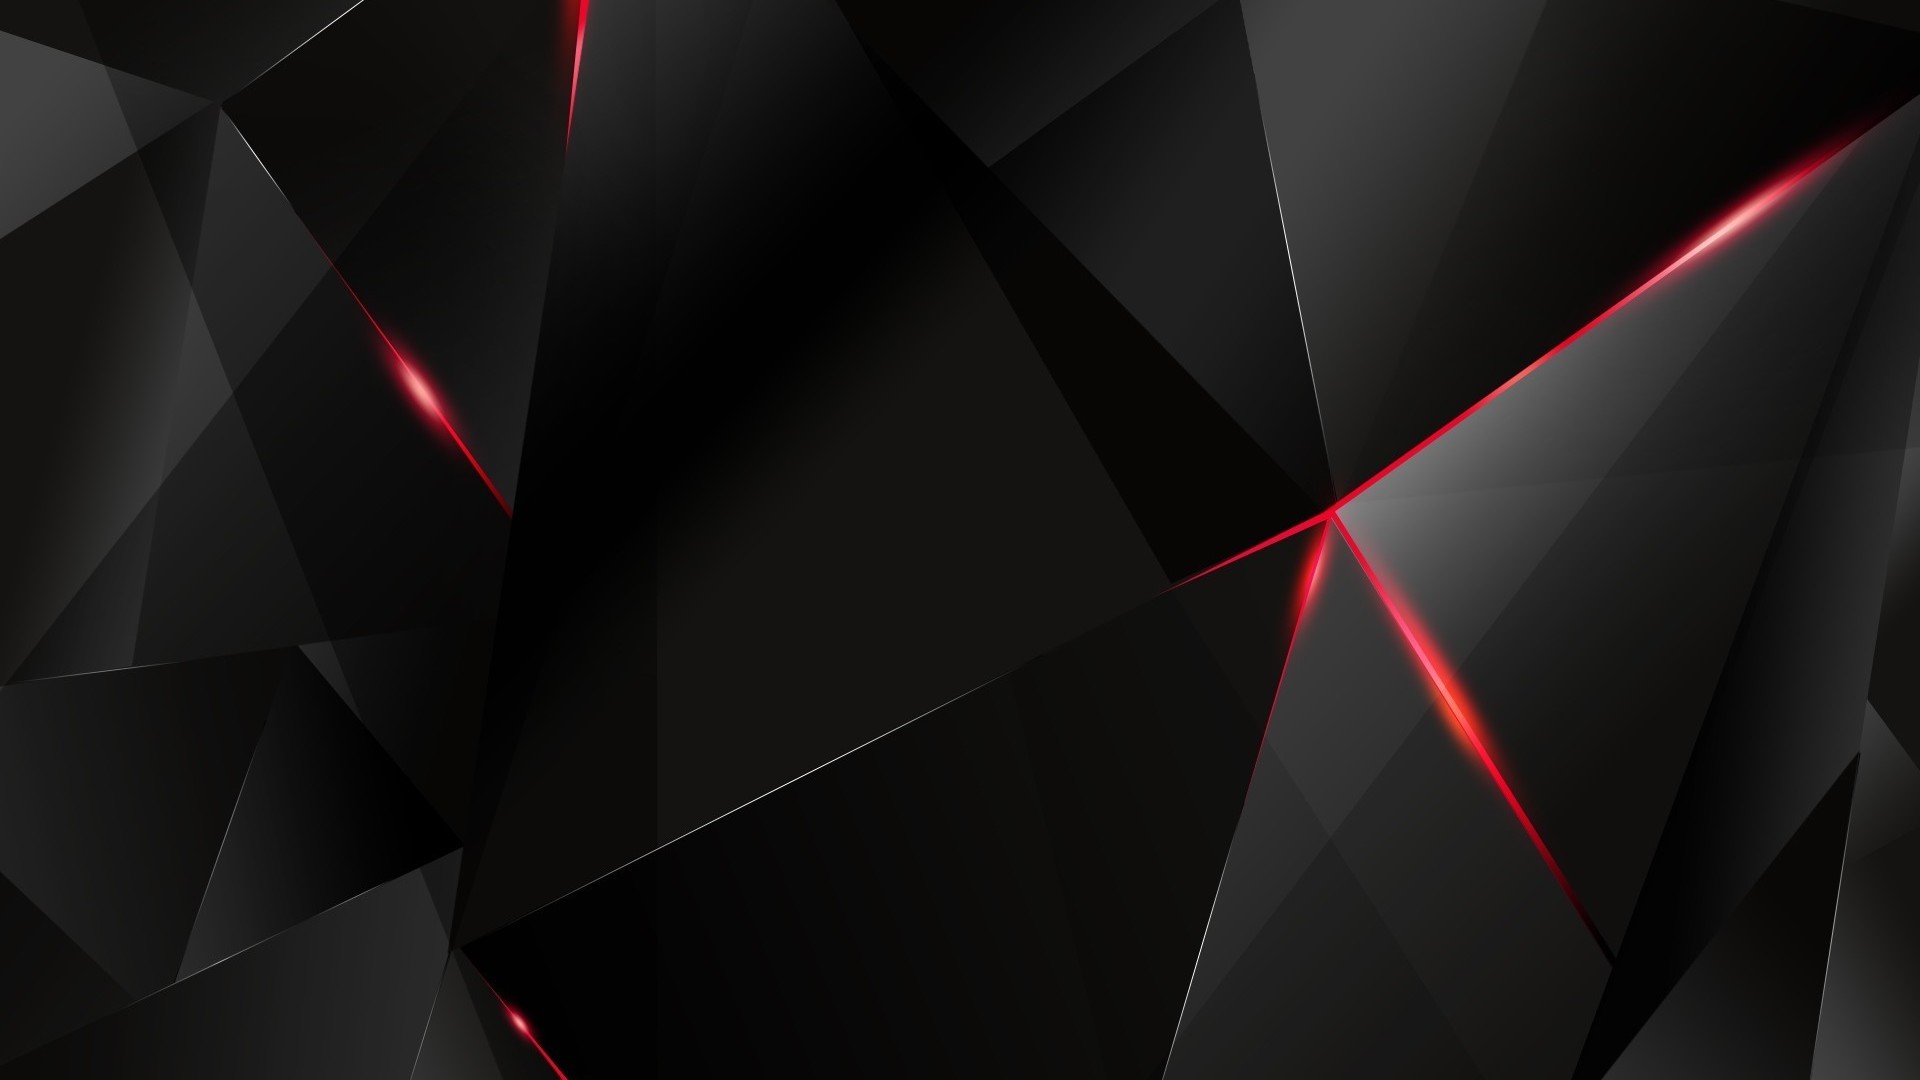 1920x1080 Black Polygon With Red Edges Abstract Hd Wallpaper 1920X1080 120